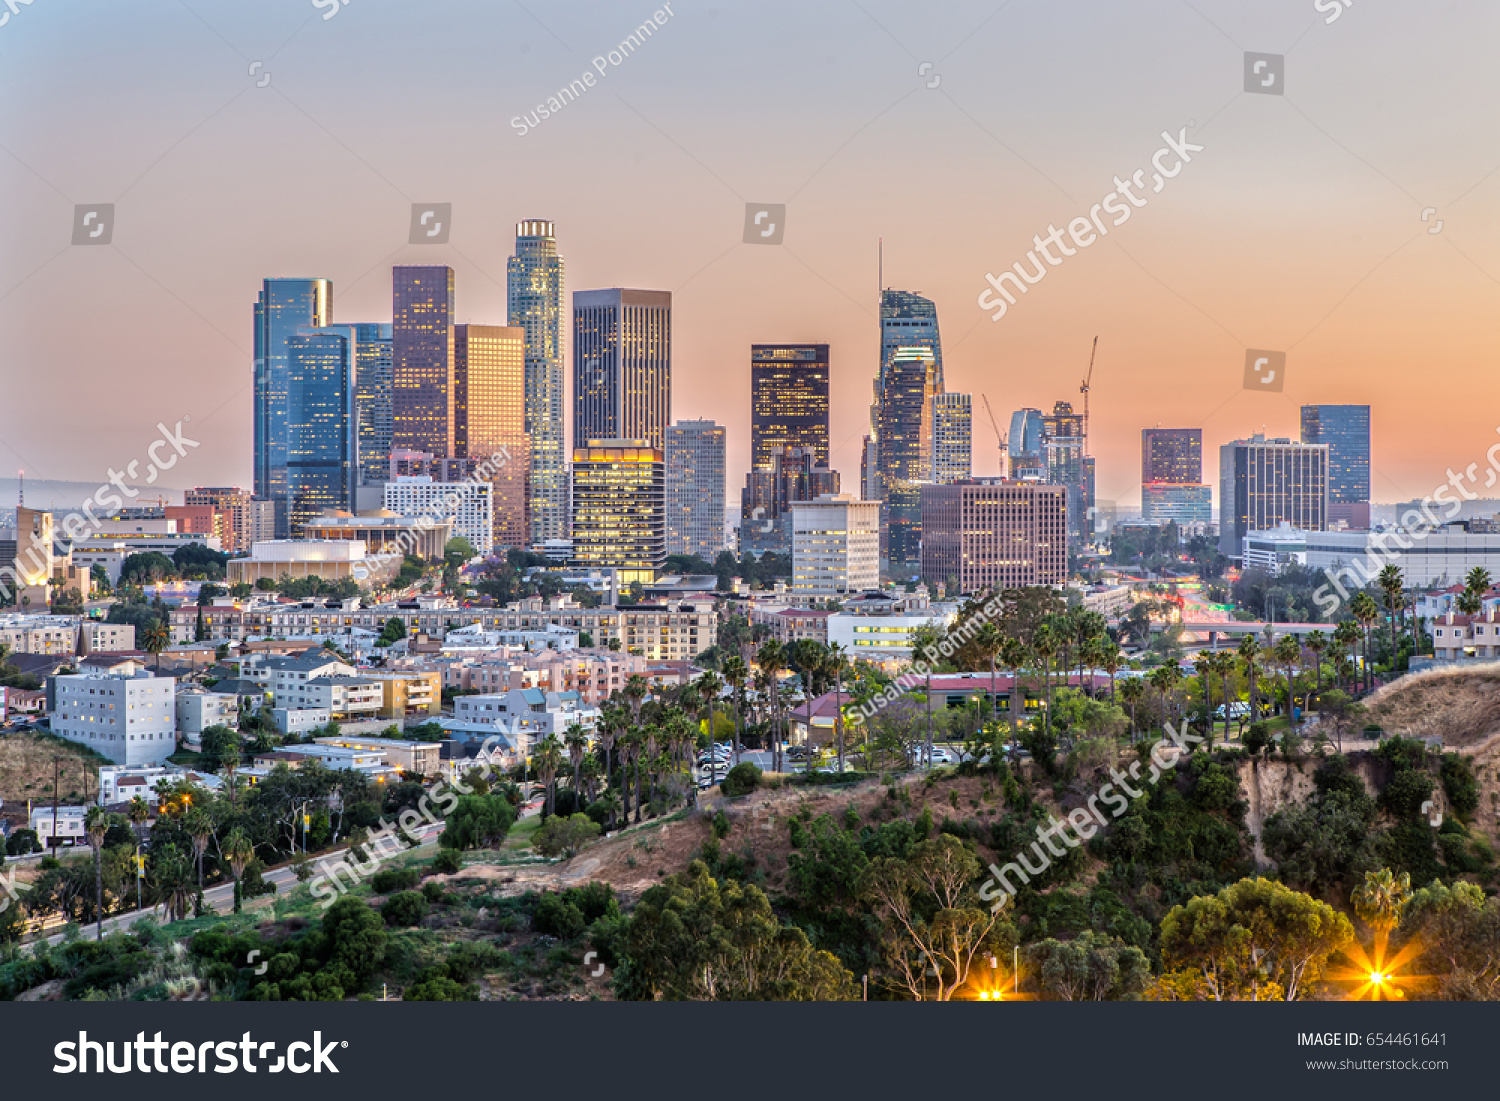 The Skyline of Los Angeles at Sunset #654461641